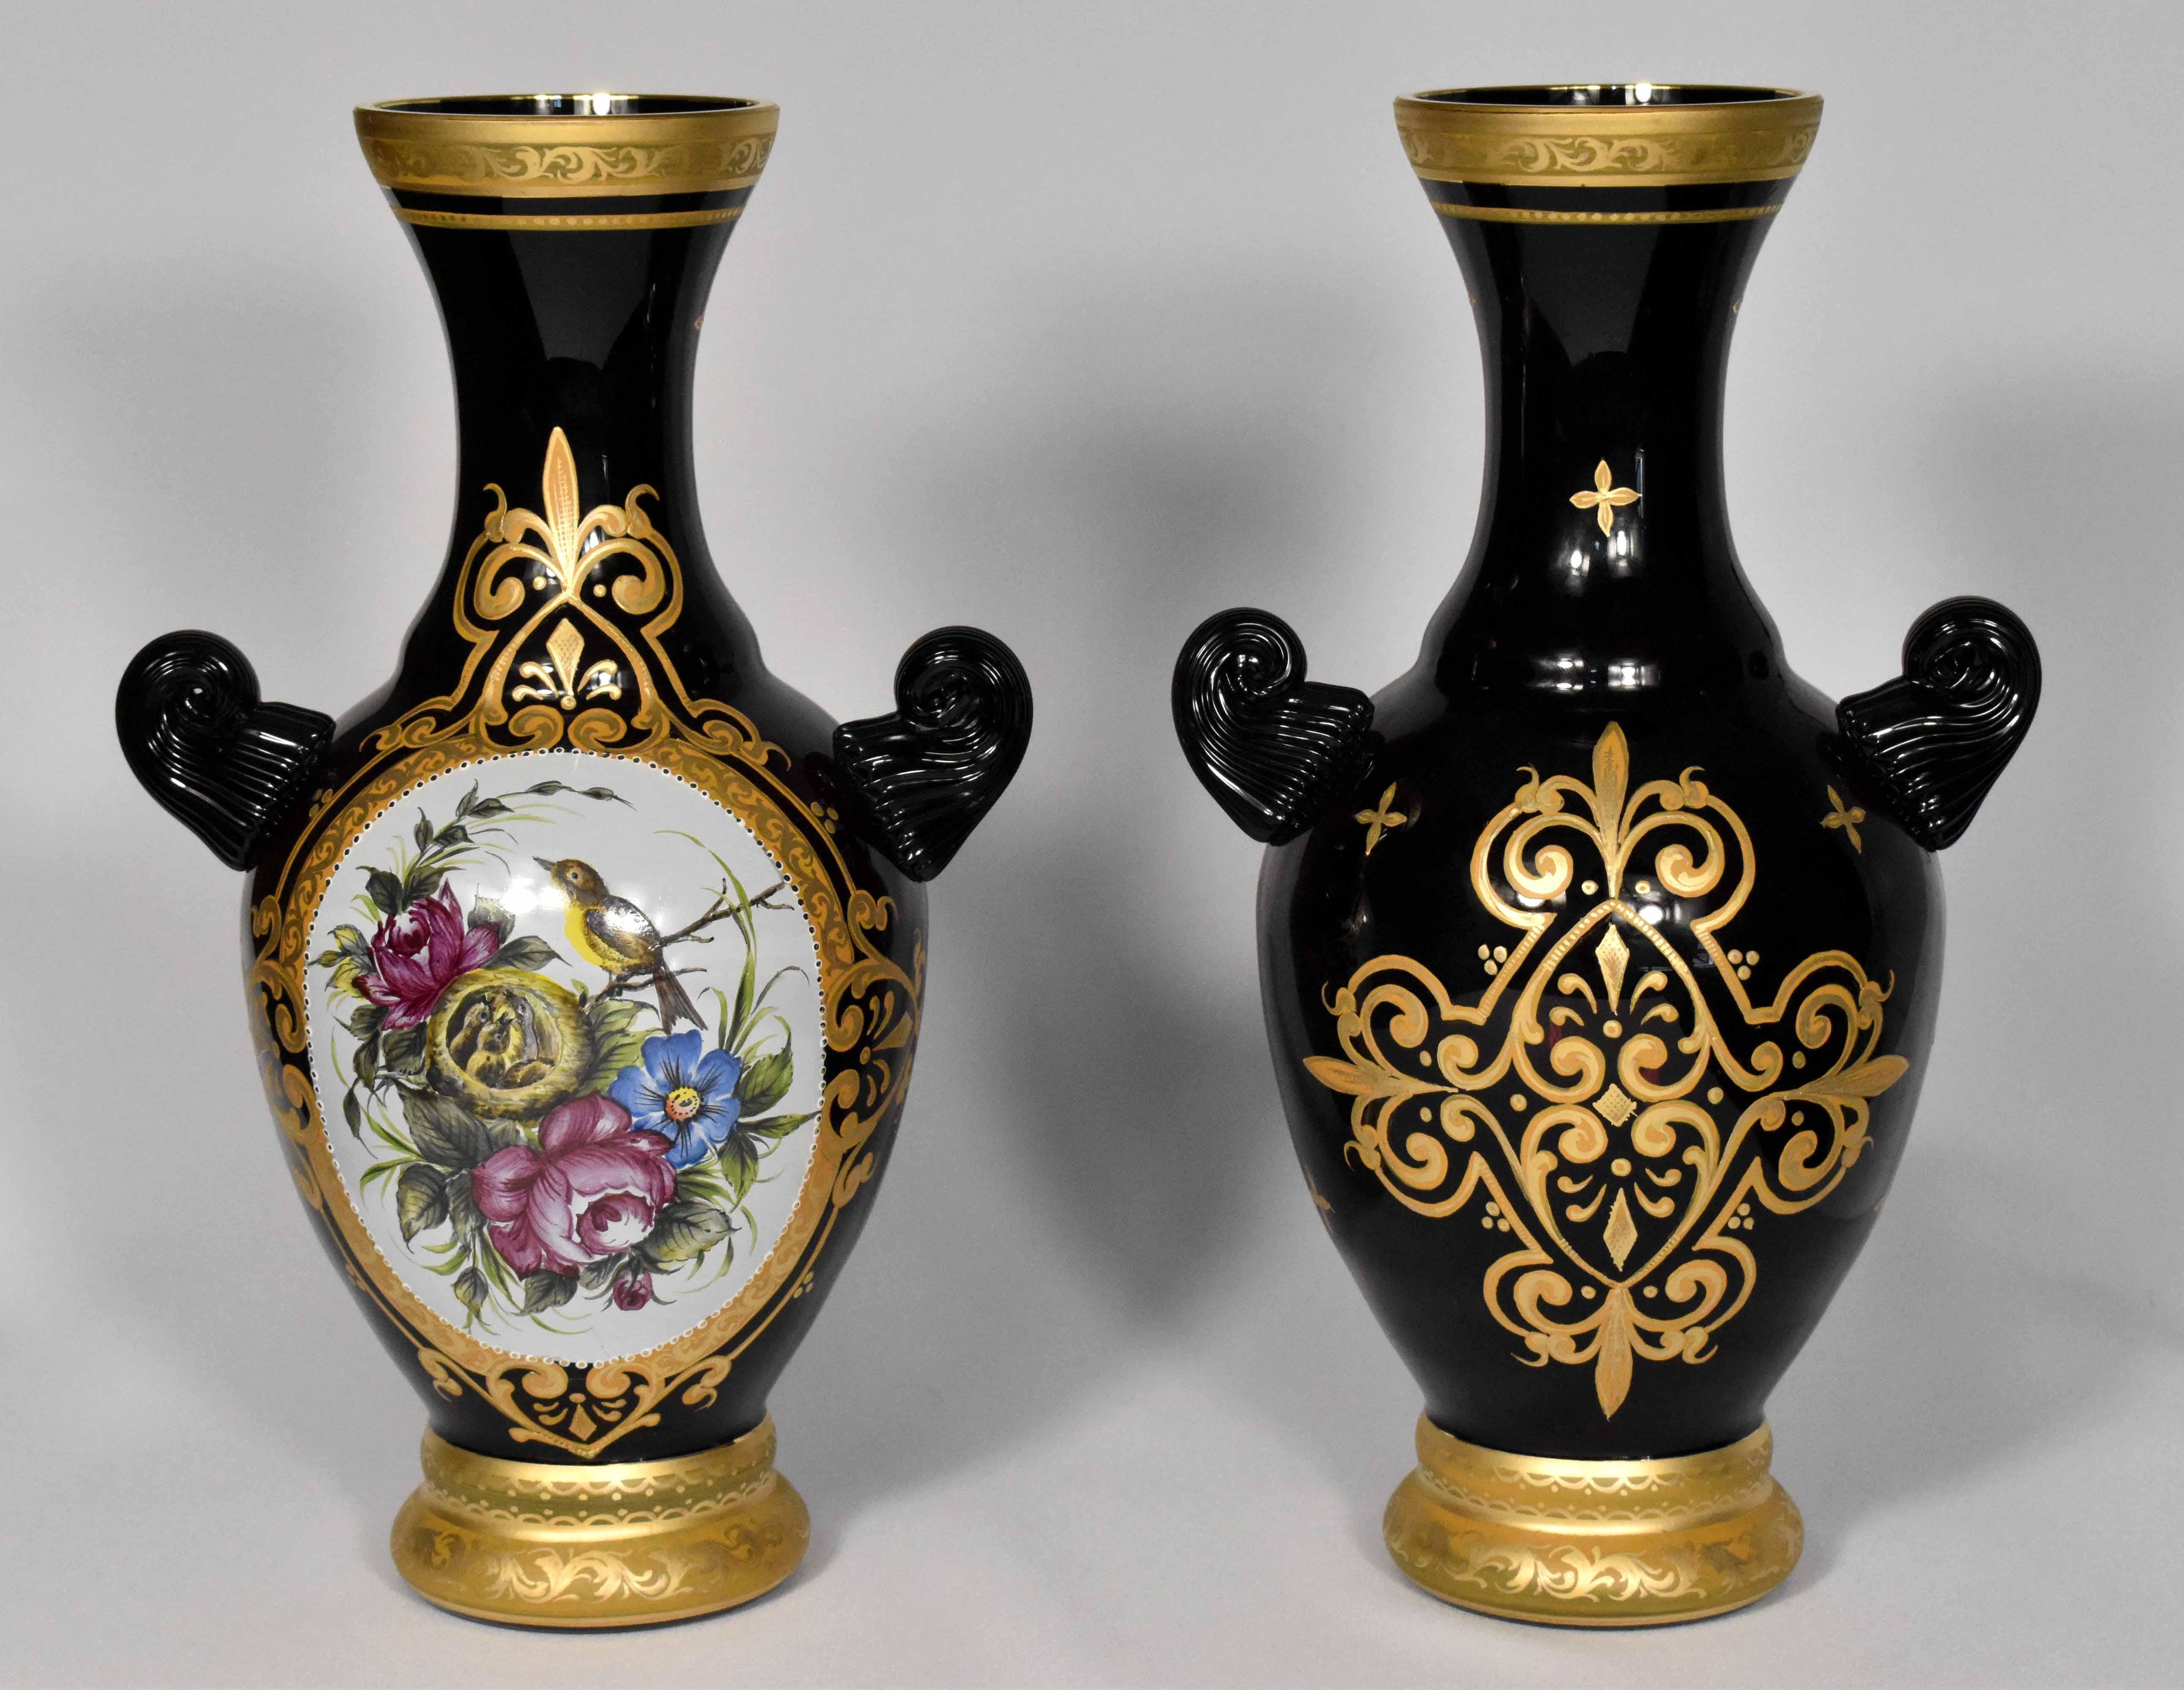 This beautiful pair of vases is made from black/purple glass. 
They’re hand-blown in a glass atelier in the Nothern Czech Republic using traditional techniques from glass masters of the 19th century.
They are decorated with ornamental paintings of